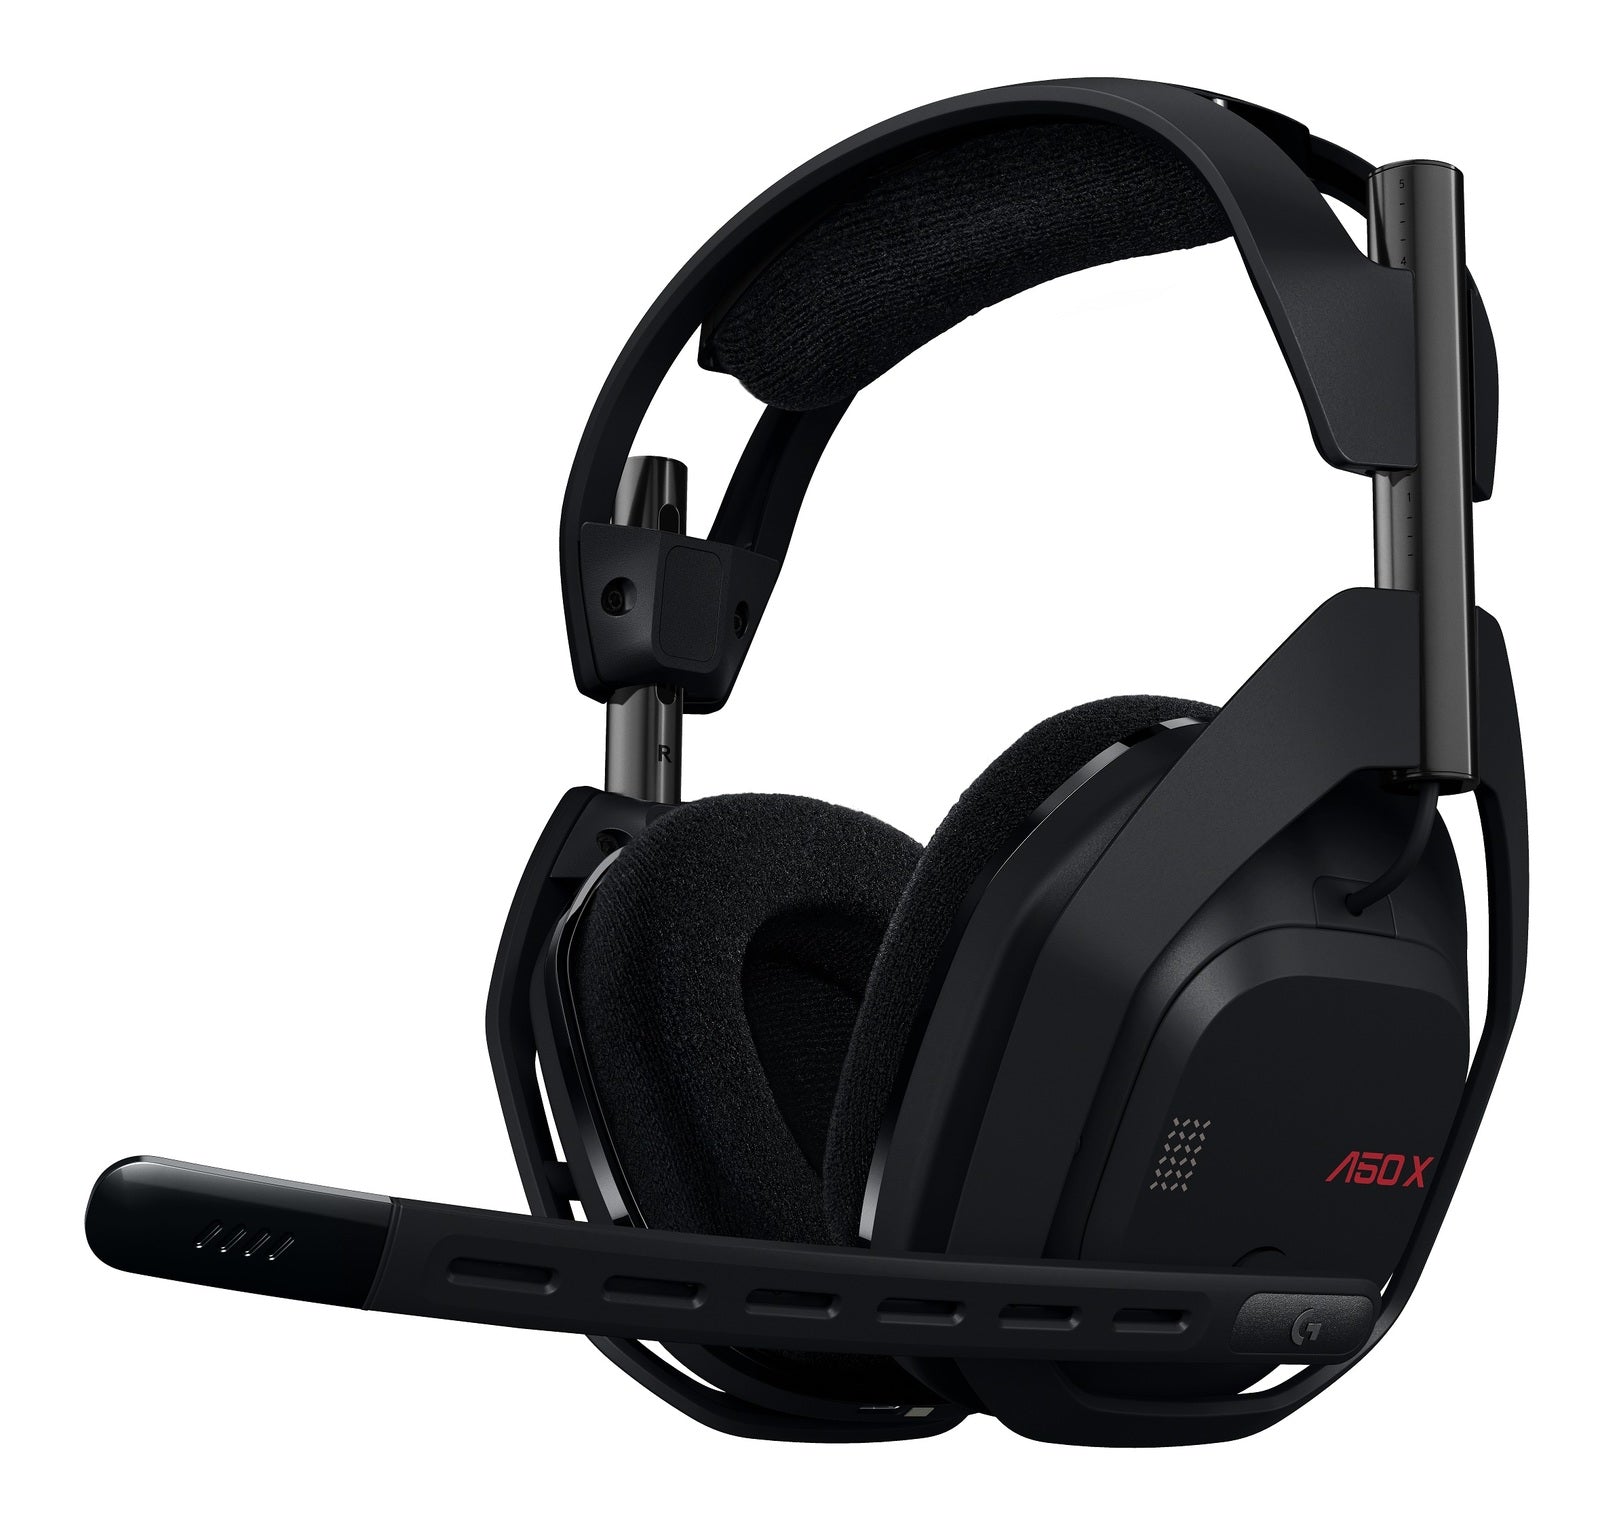 Logitech G ASTRO A50 X LIGHTSPEED Wireless Gaming Headset + Base Station  now available for pre-order